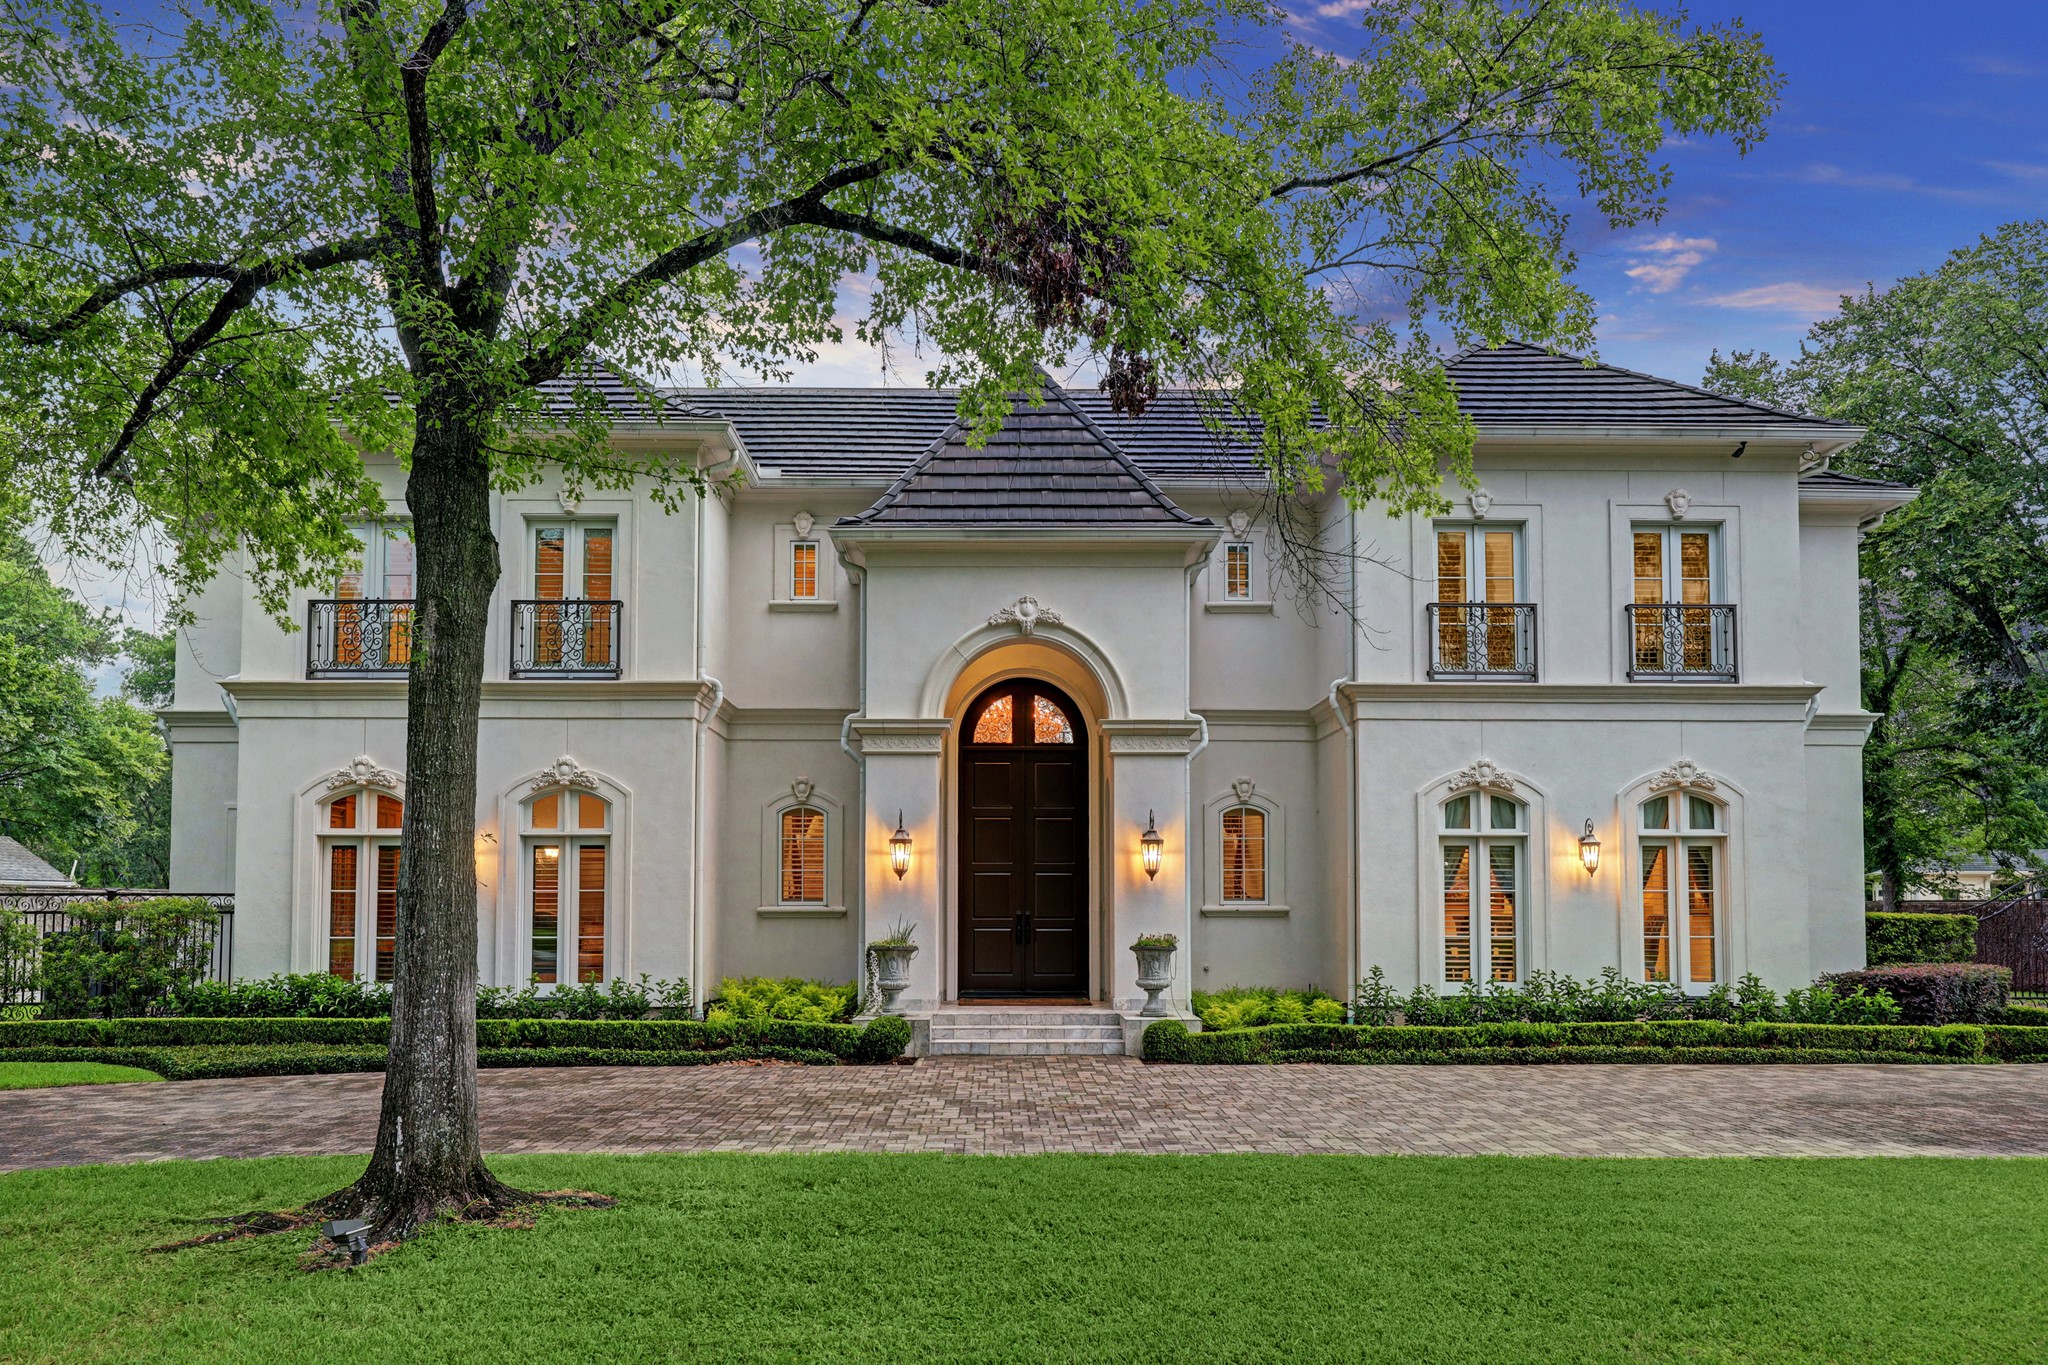 Truly extraordinary French-style home in Piney Point Village, custom built by King Residential. Featuring 6 beds, 6 full and 3 half baths, formals, chef's kitchen & additional catering kitchen, family room, home theater, game room and library, this home is perfect for both luxurious everyday living and high-end entertaining of all sizes